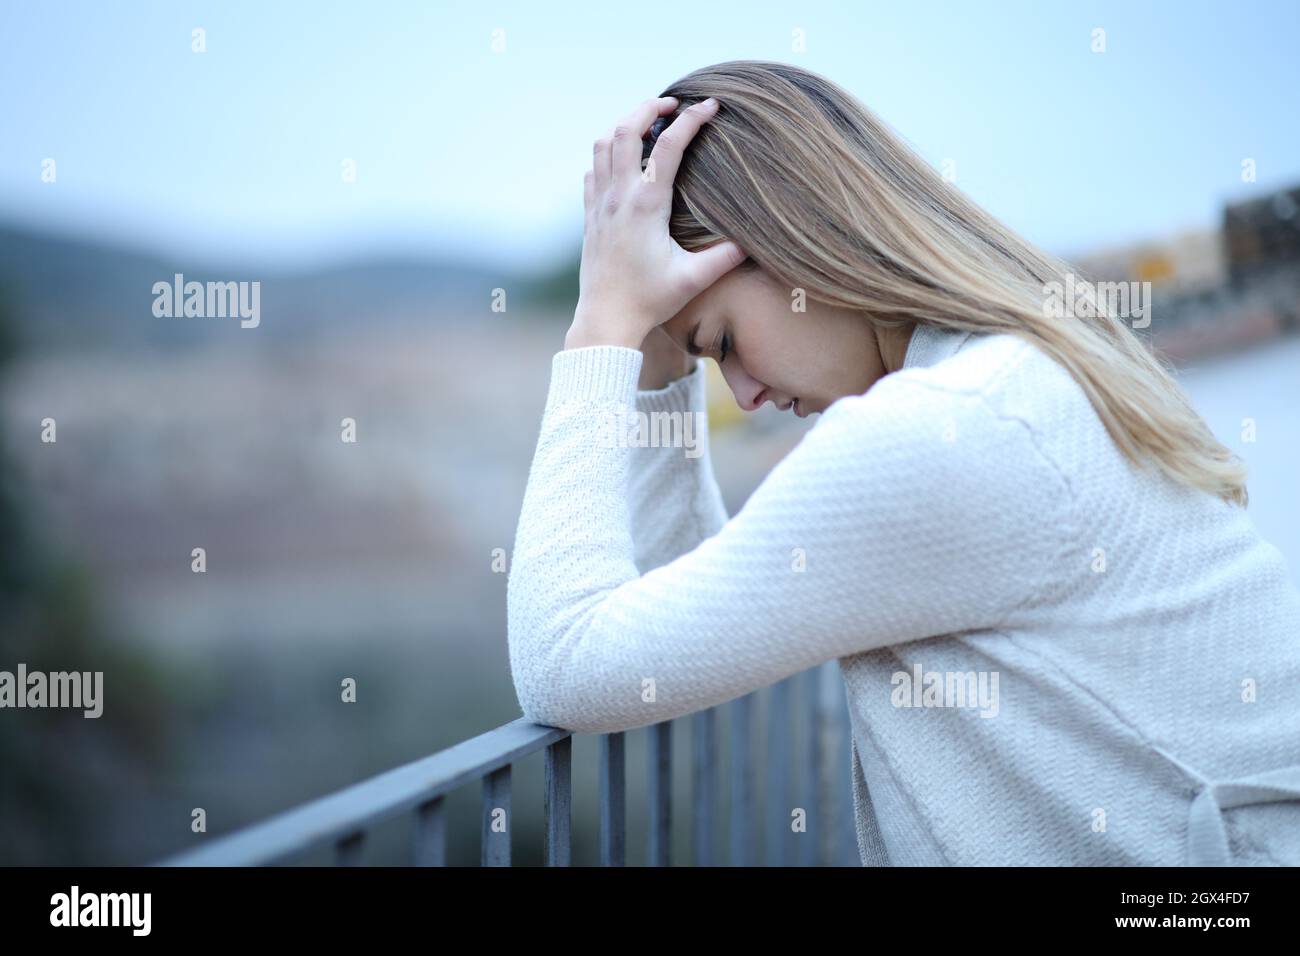 Side view portrait of a depressed woman complaining in balcony Stock Photo